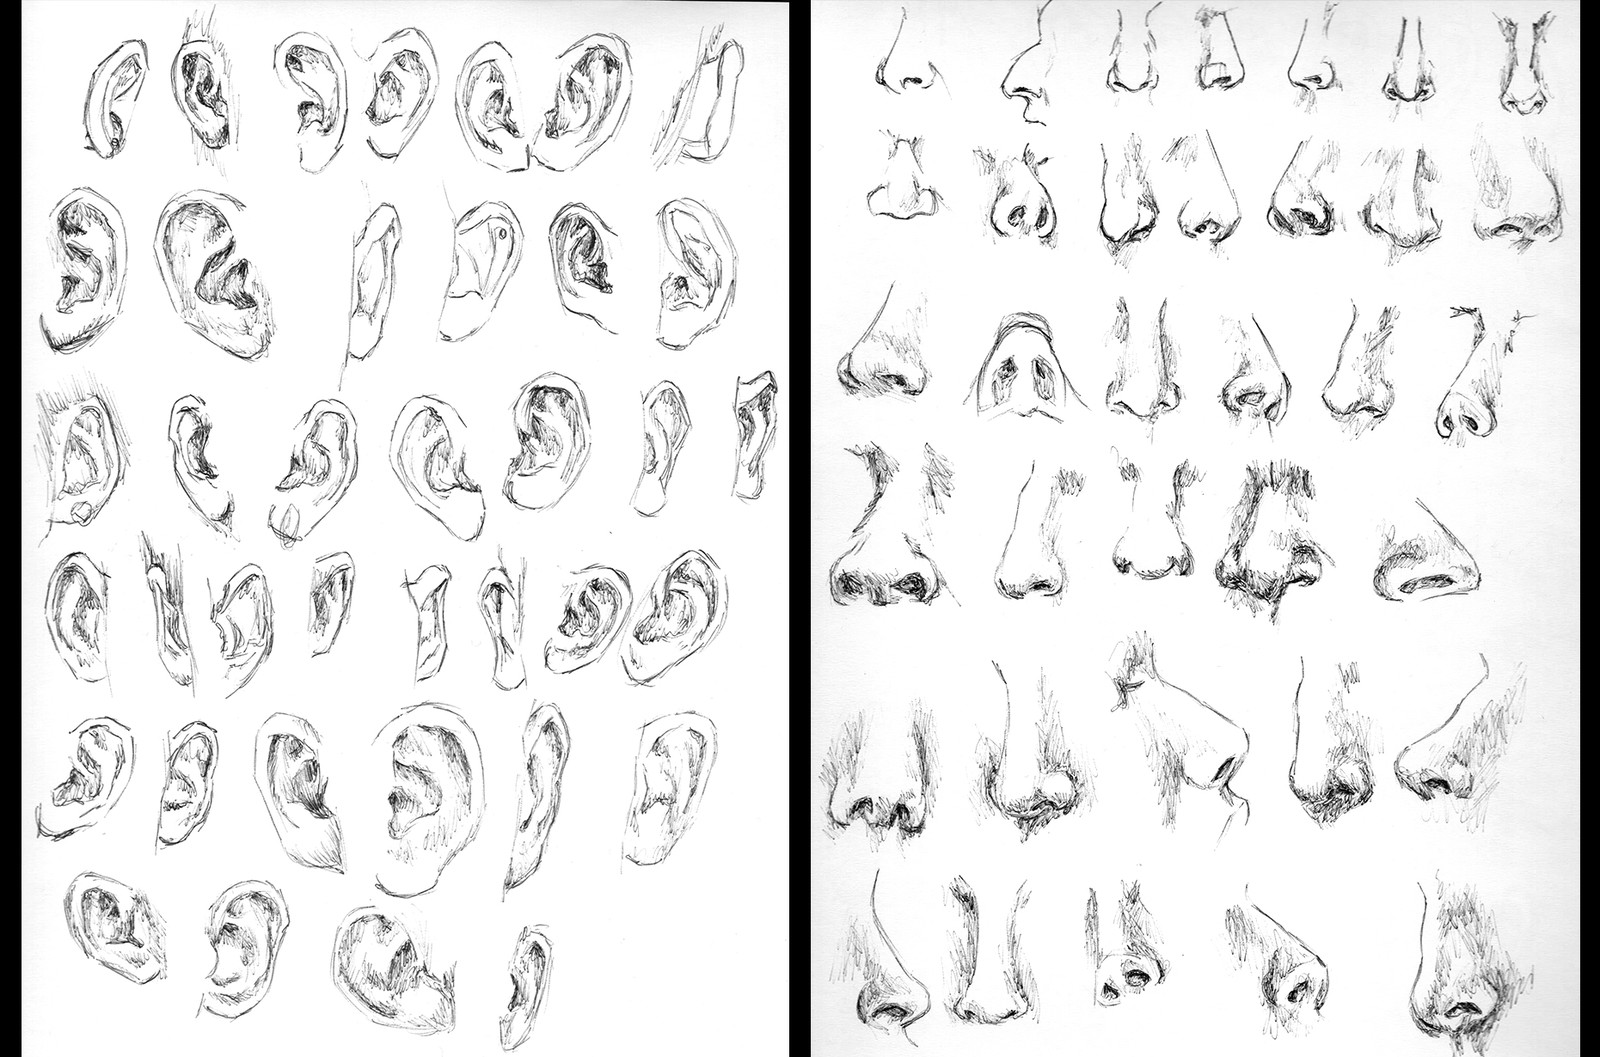 Anatomy practice - Ears and Noses